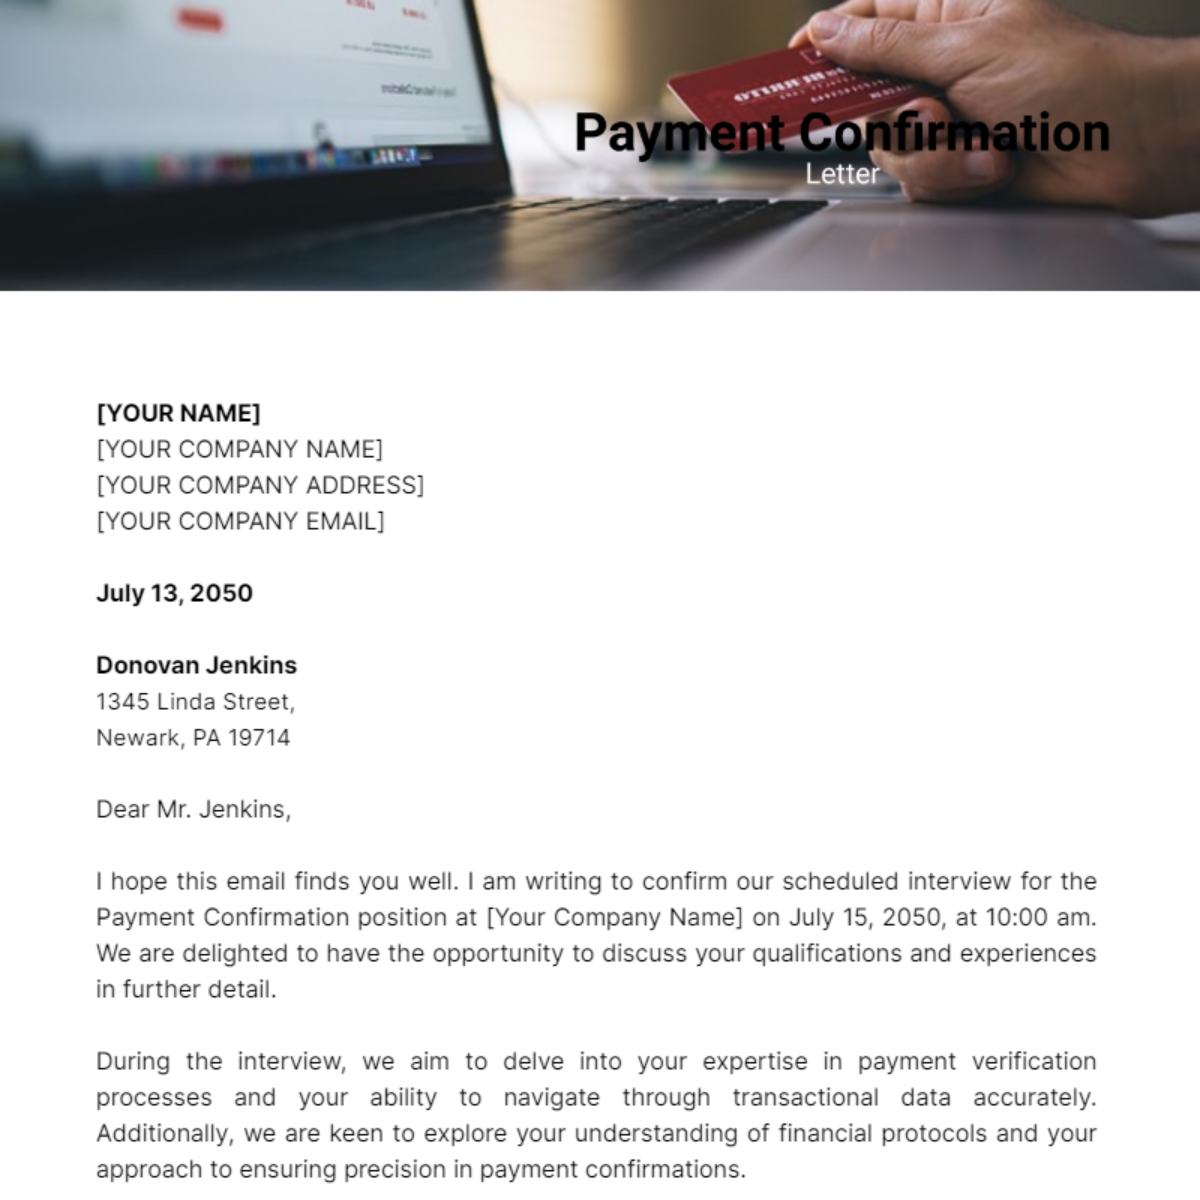 Payment Confirmation Letter Template